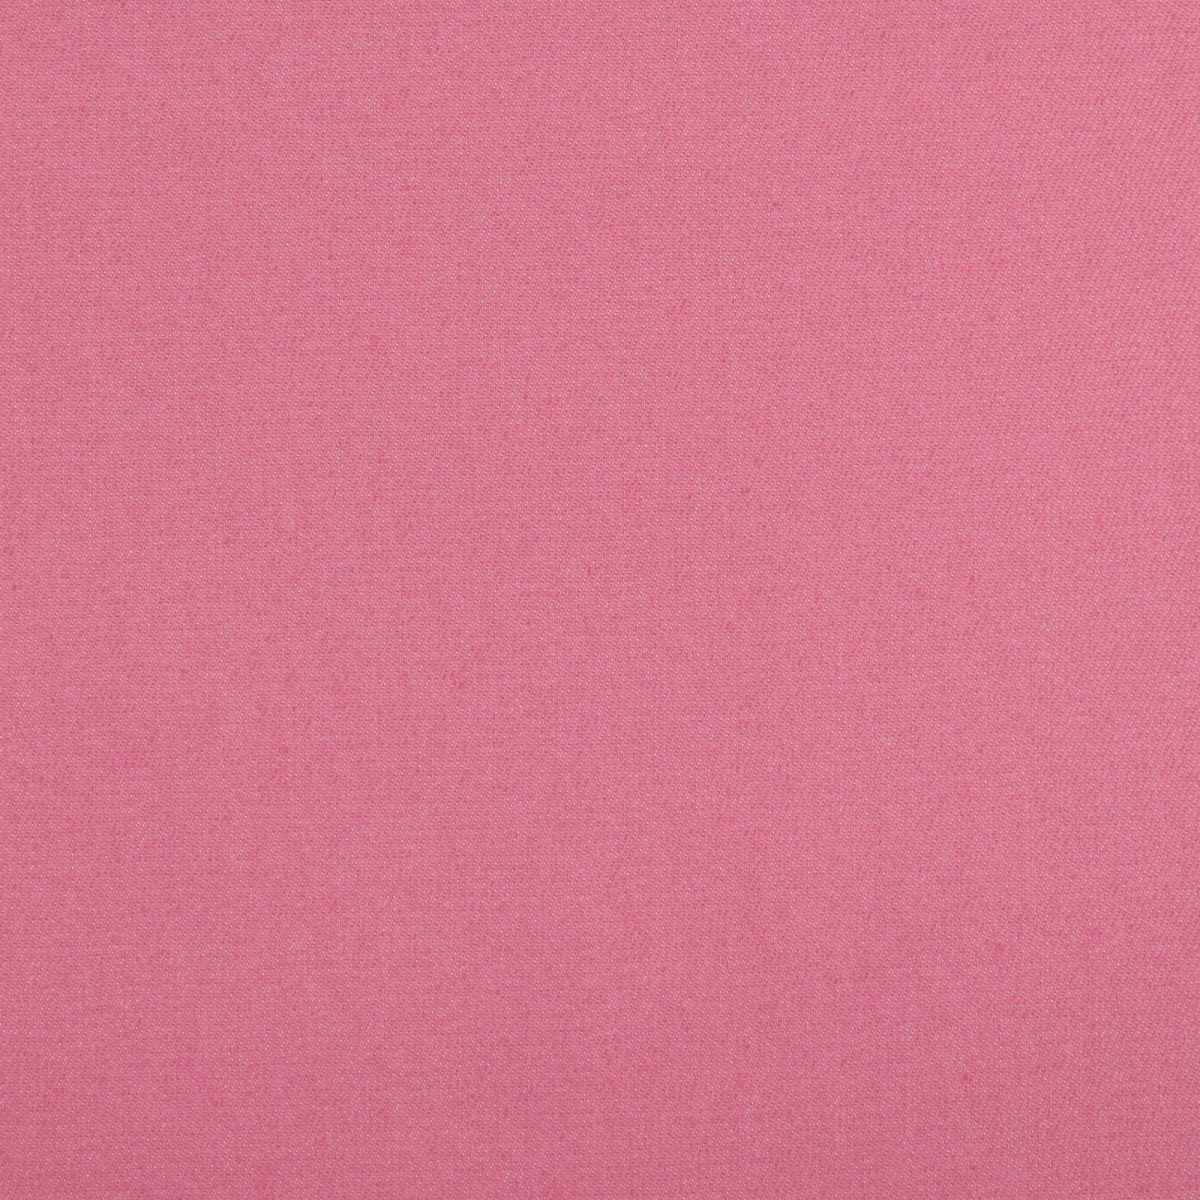 Wholesale pink denim fabric For A Classic Clothing Style 